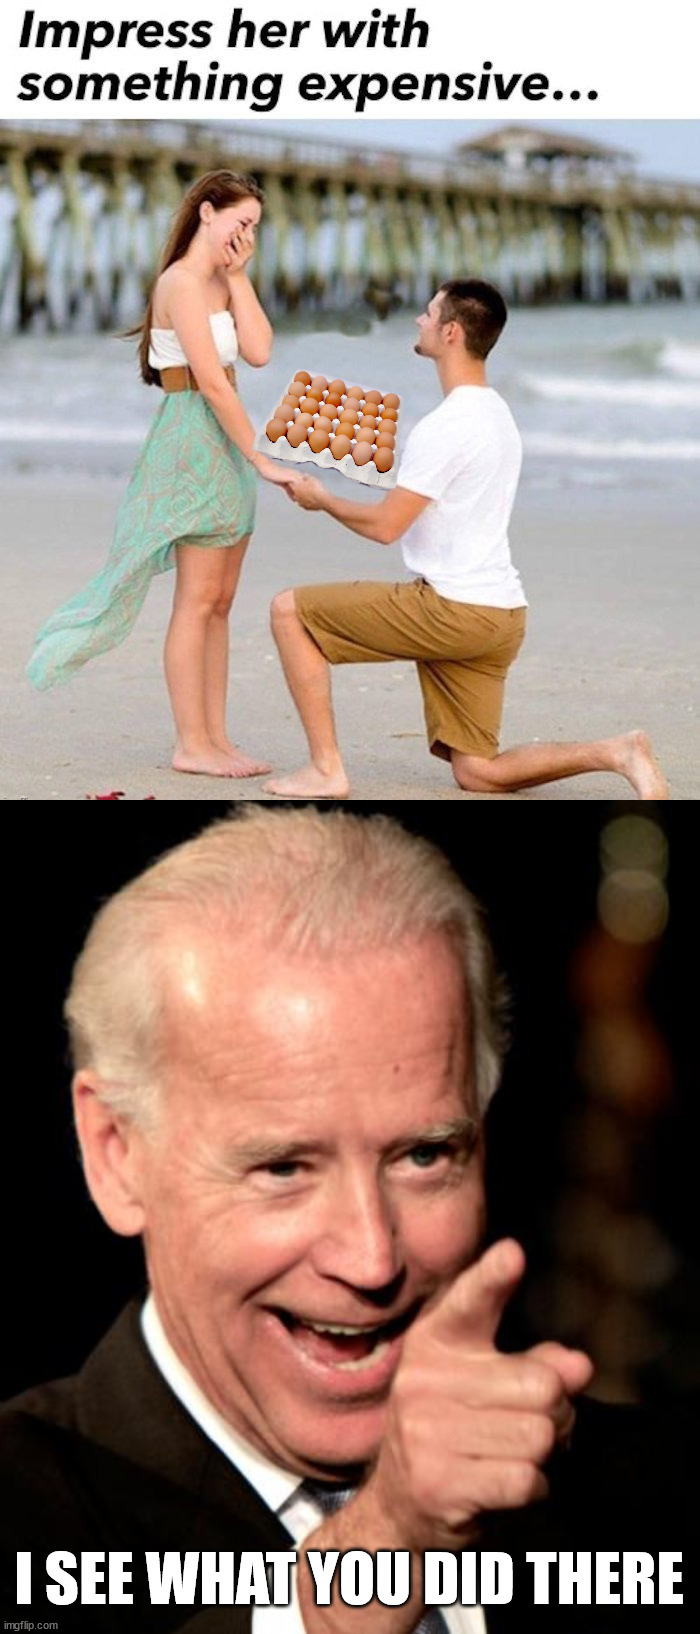 I SEE WHAT YOU DID THERE | image tagged in memes,smilin biden | made w/ Imgflip meme maker